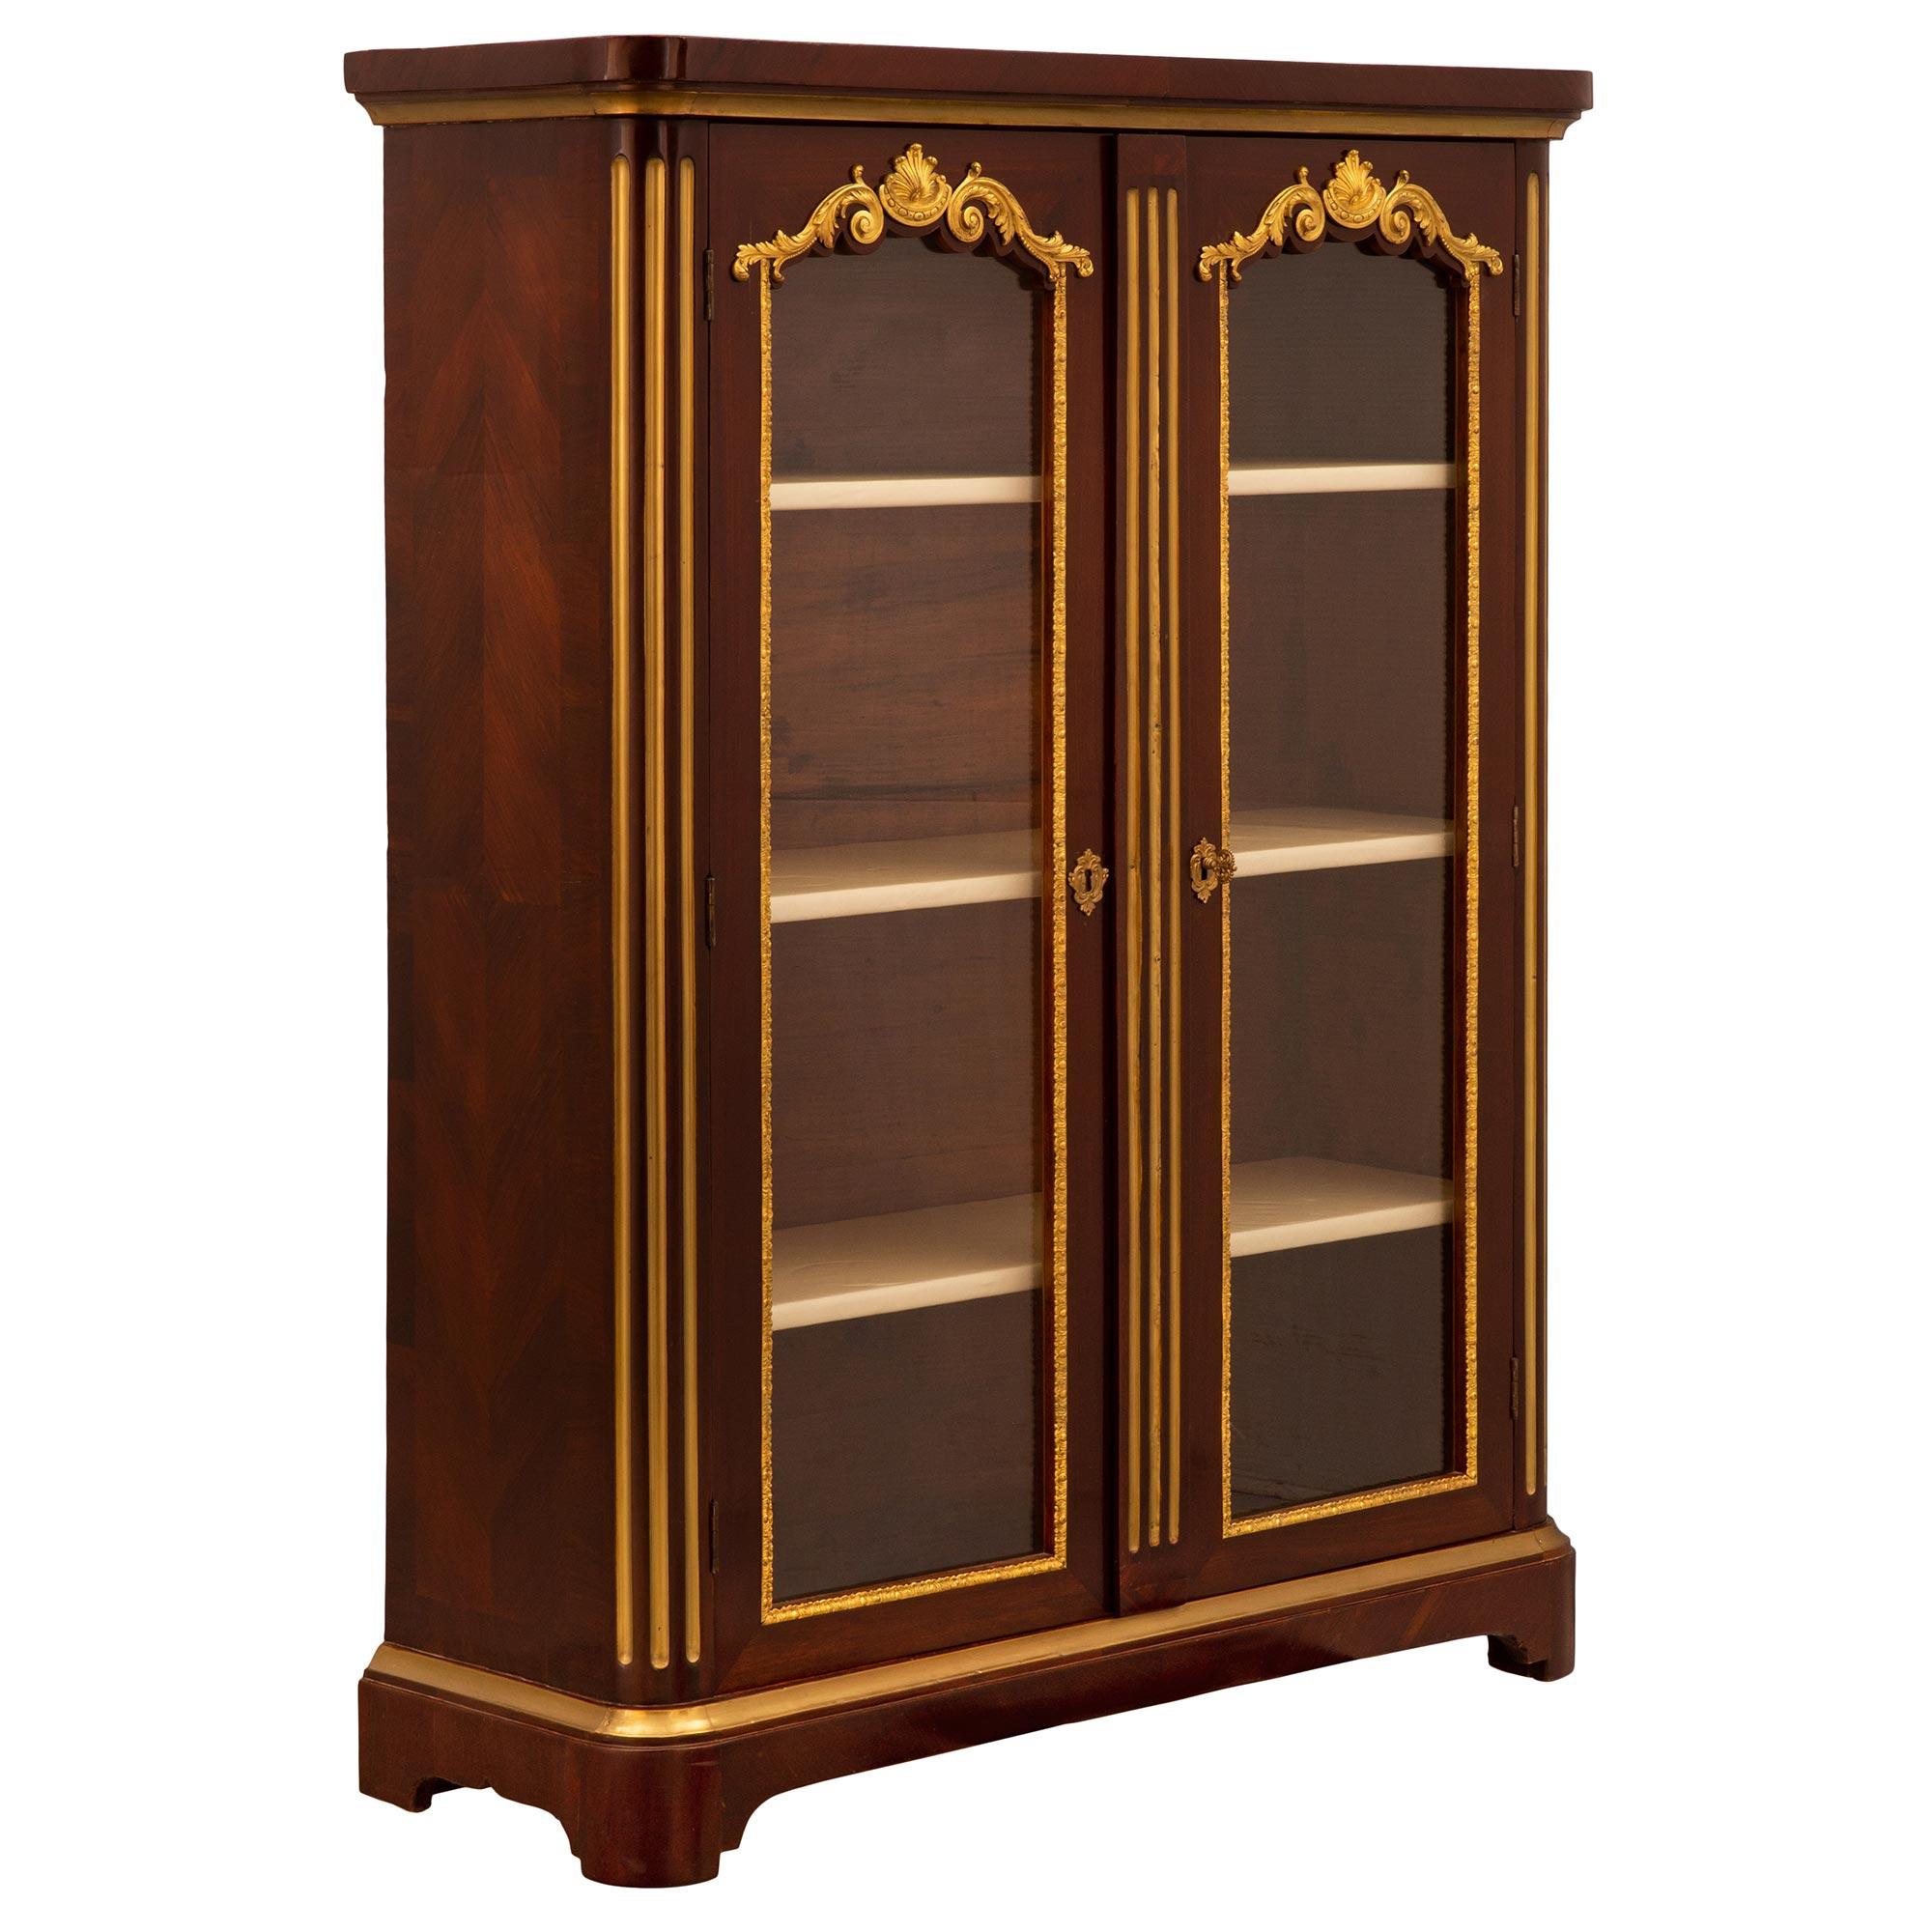 French 18th Century Regence Period Kingwood, Ormolu, and Brass Cabinet Vitrine In Good Condition For Sale In West Palm Beach, FL